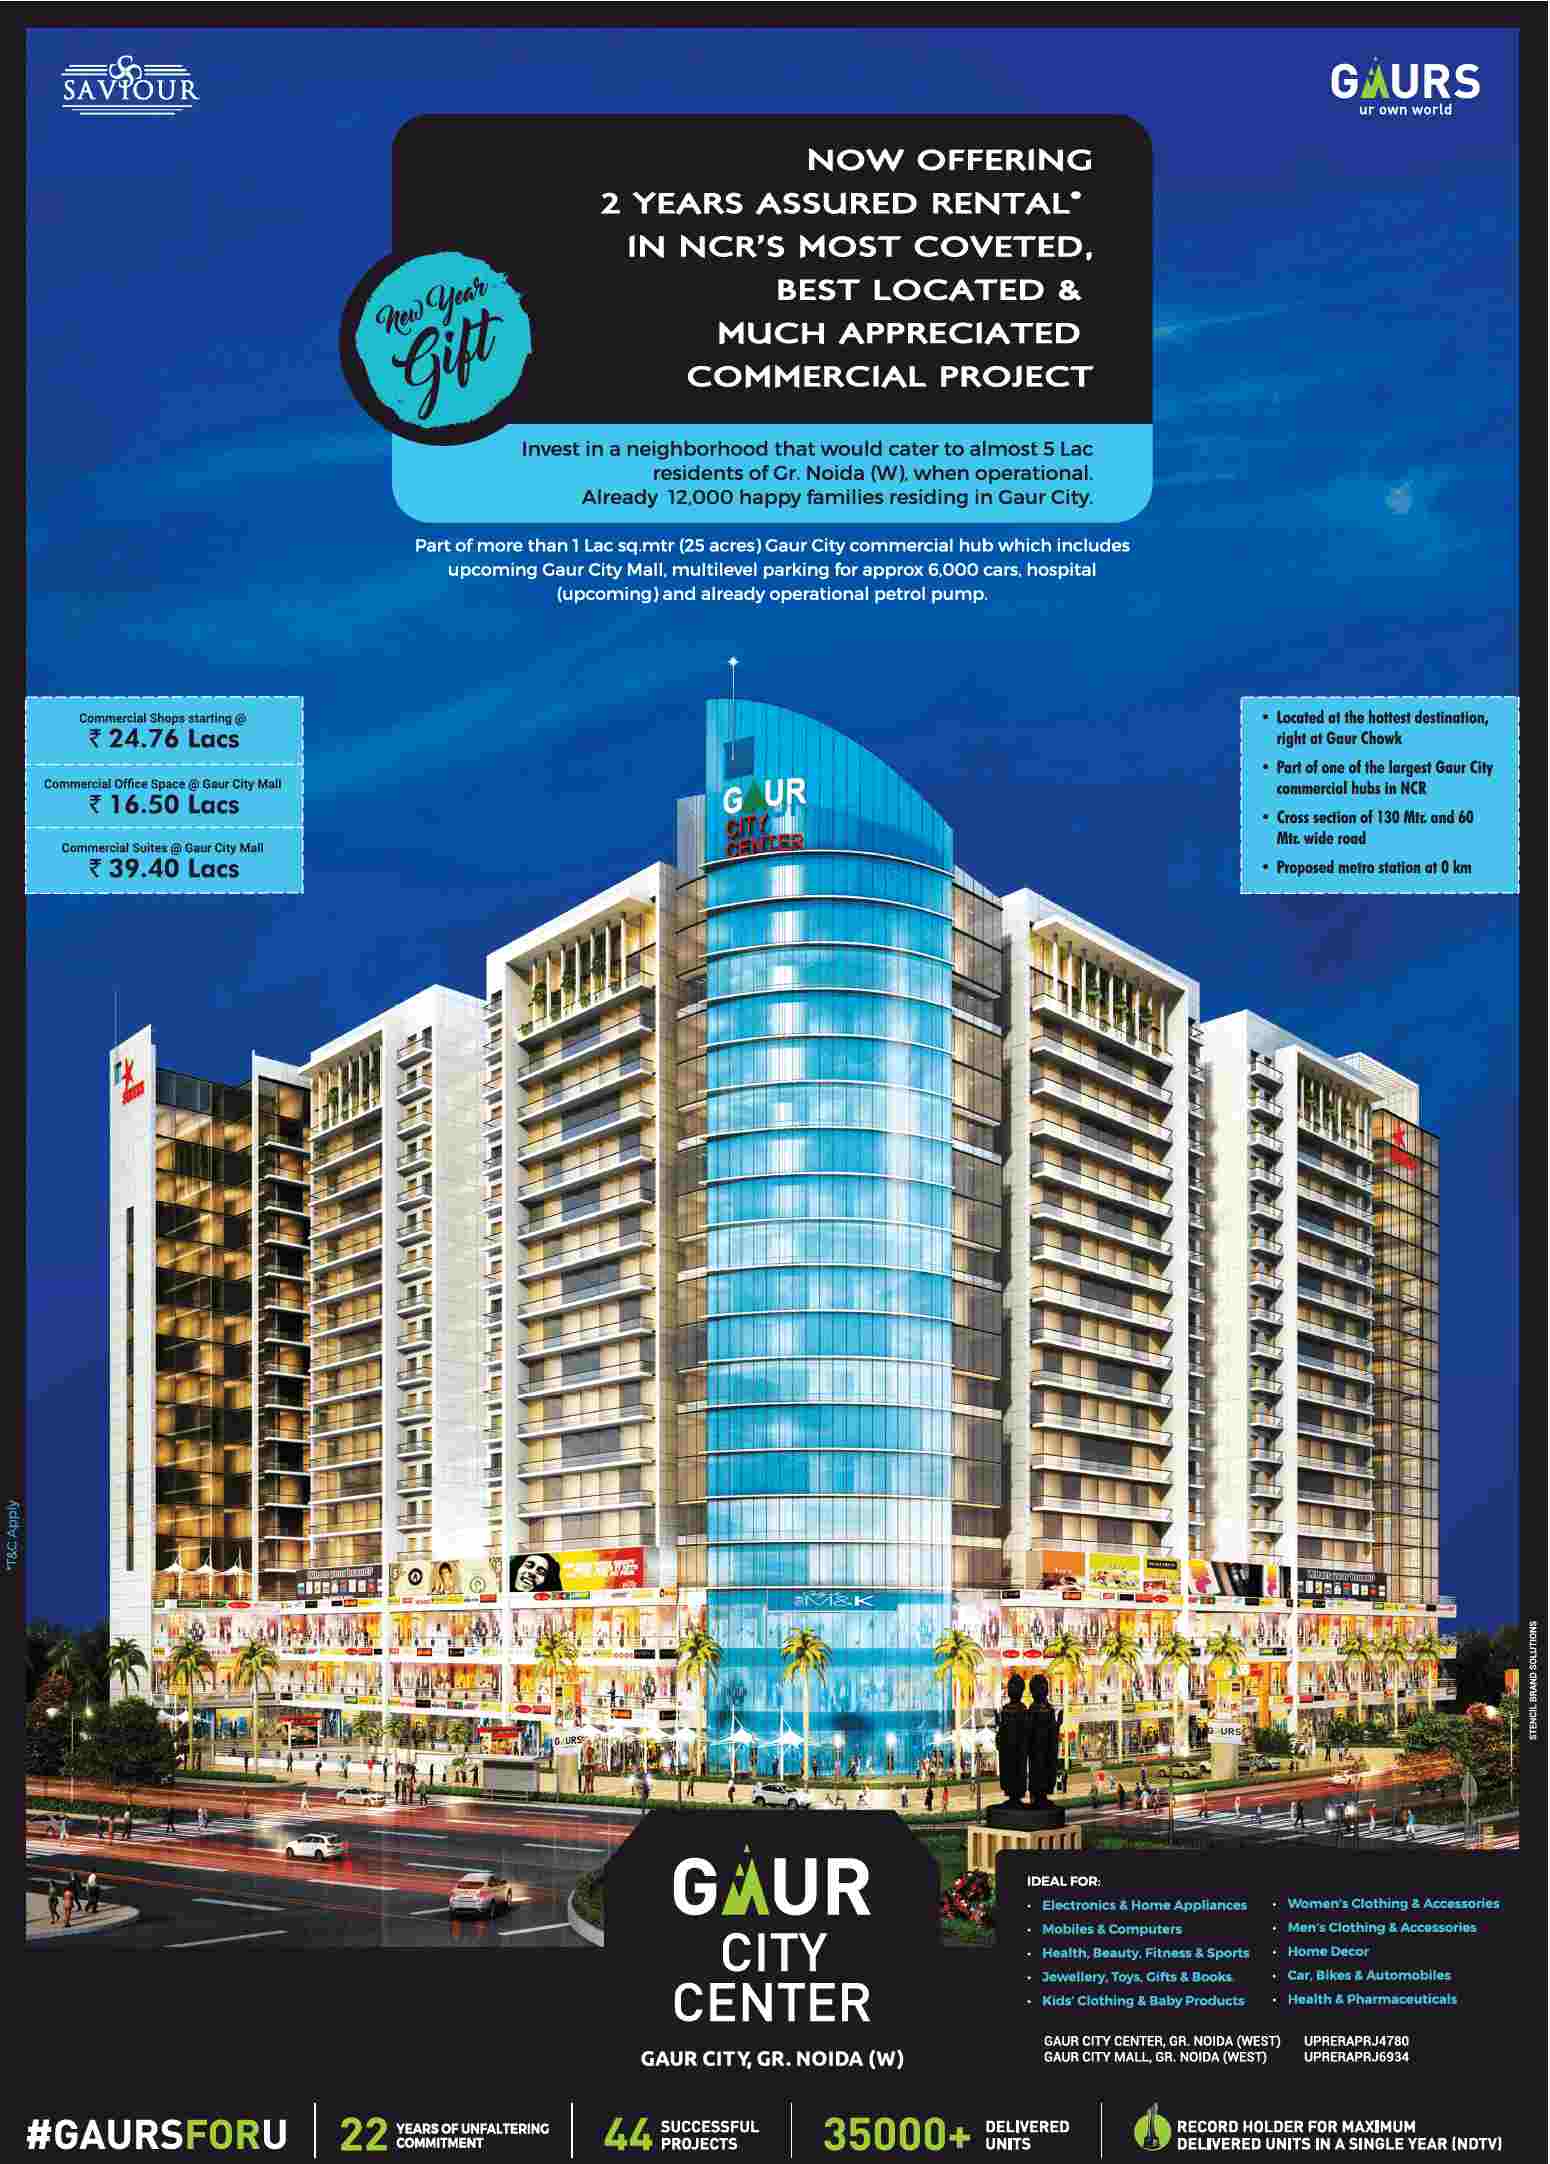 Invest in a neighborhood that would cater to almost 5 Lac residents at Gaur Saviours City Center in Greater Noida